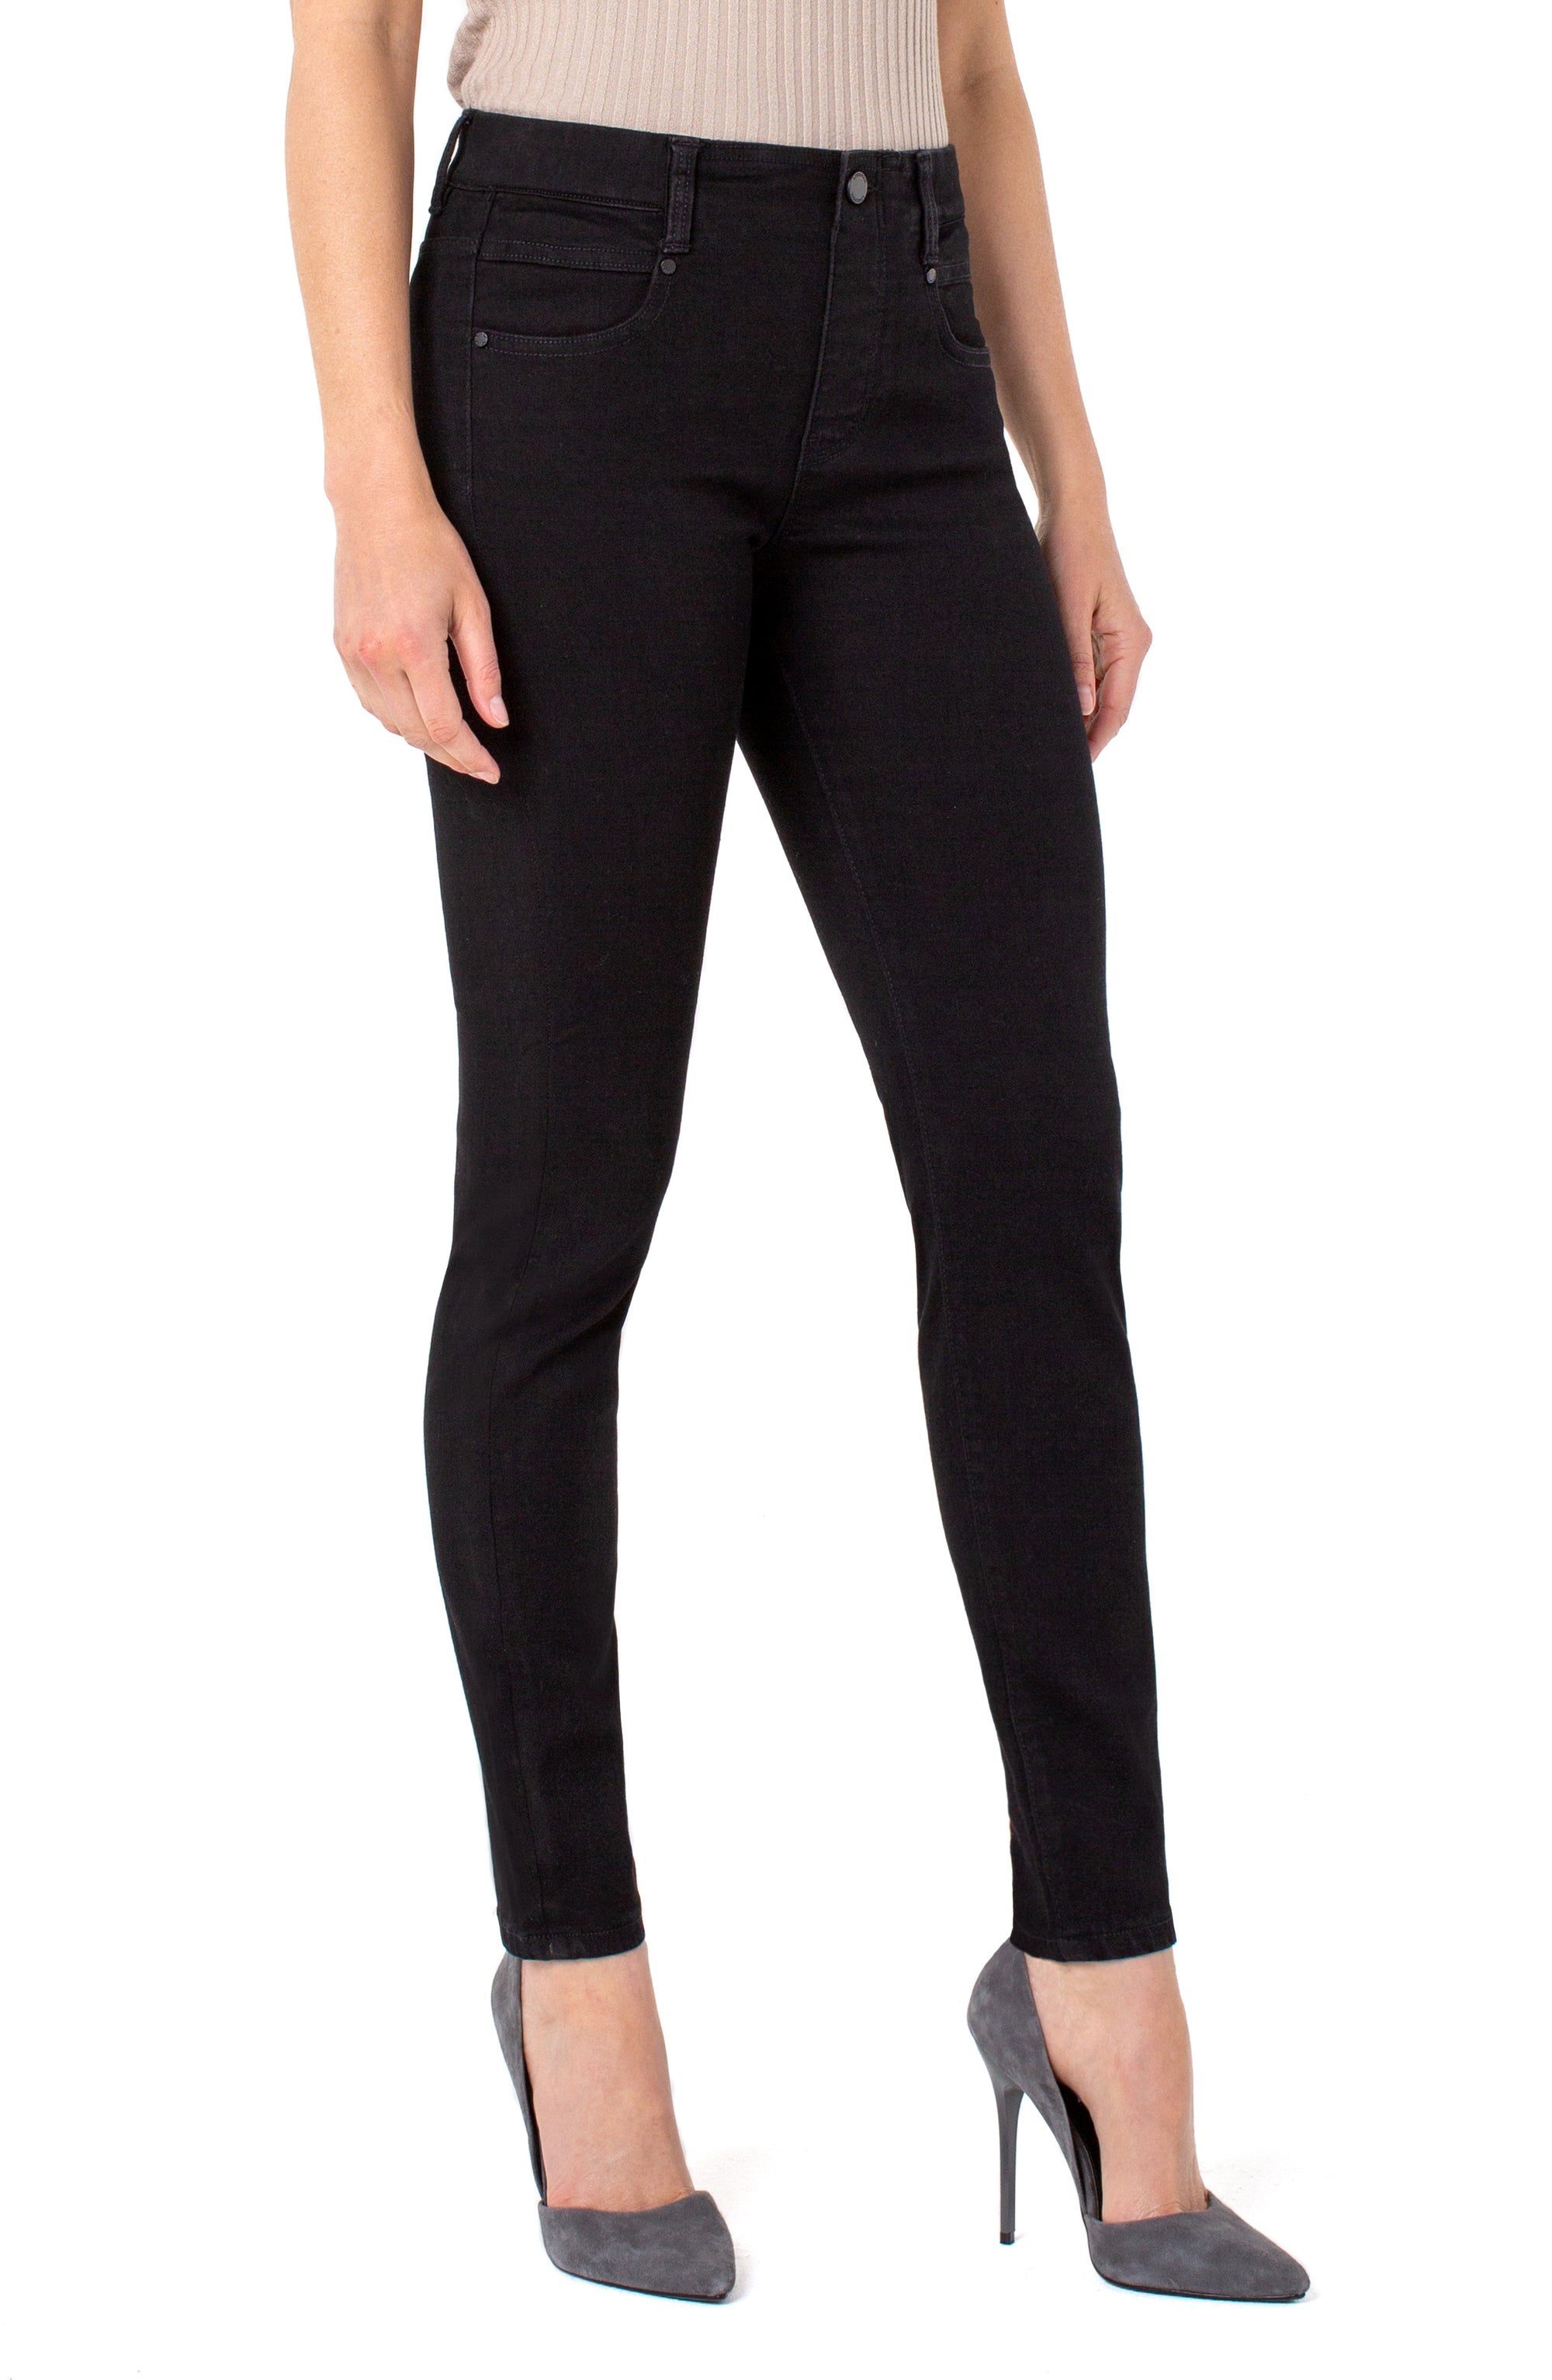 Liverpool Los Angeles Gia Glider Skinny 30", Black Rinse - Statement Boutique